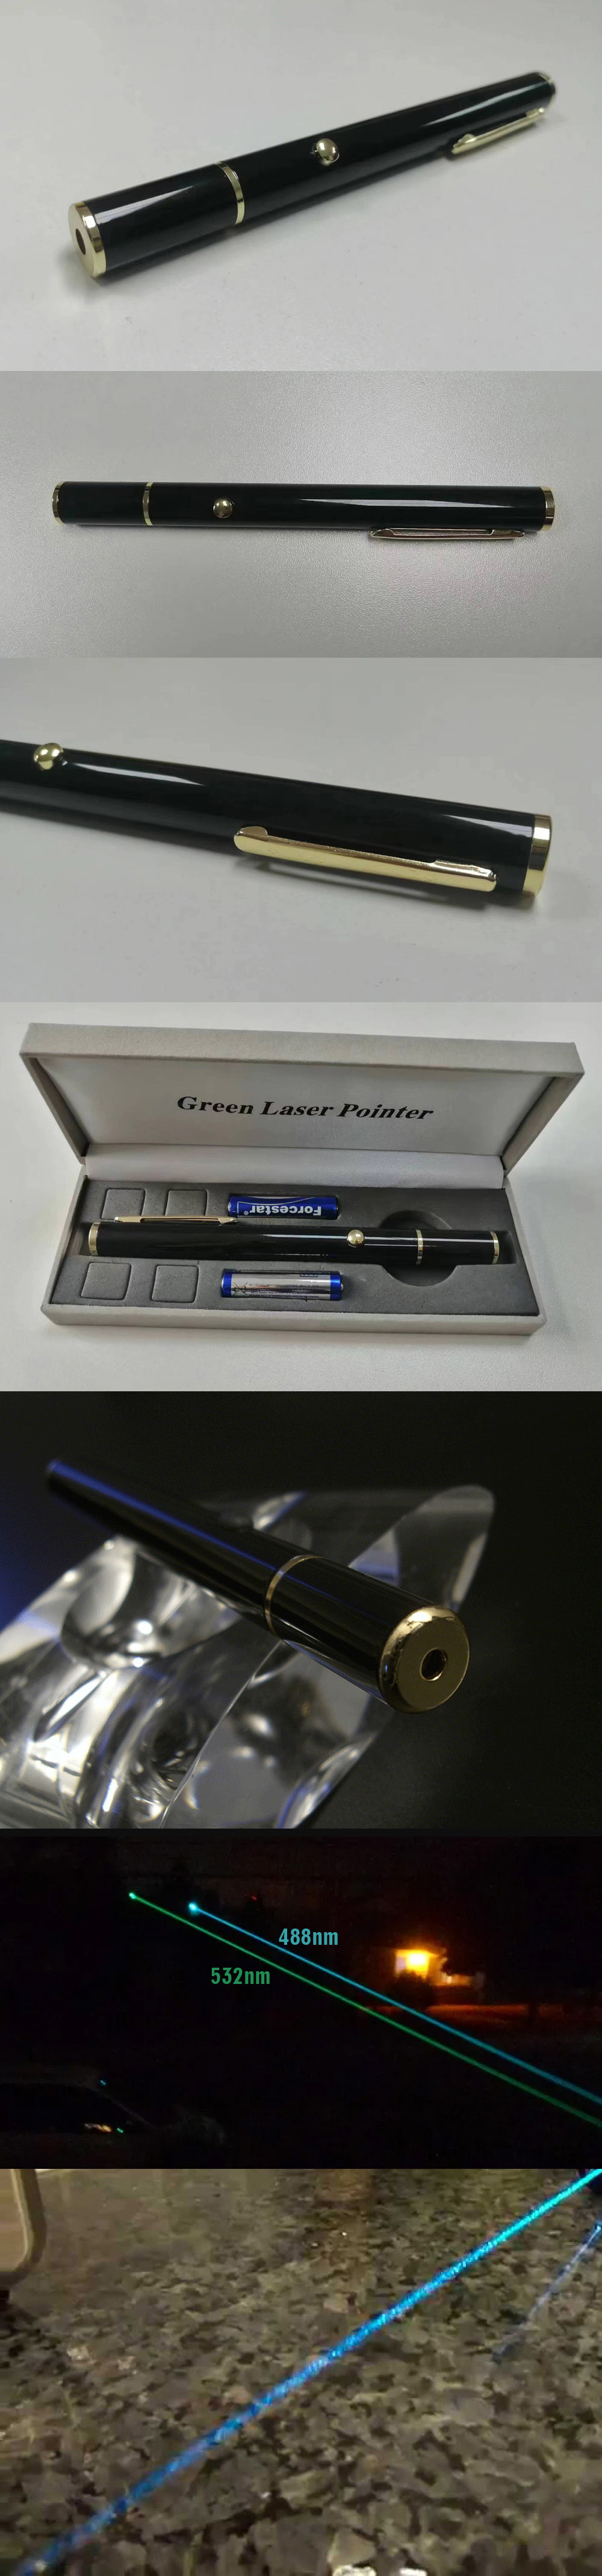 Penna laser ciano 488 nm